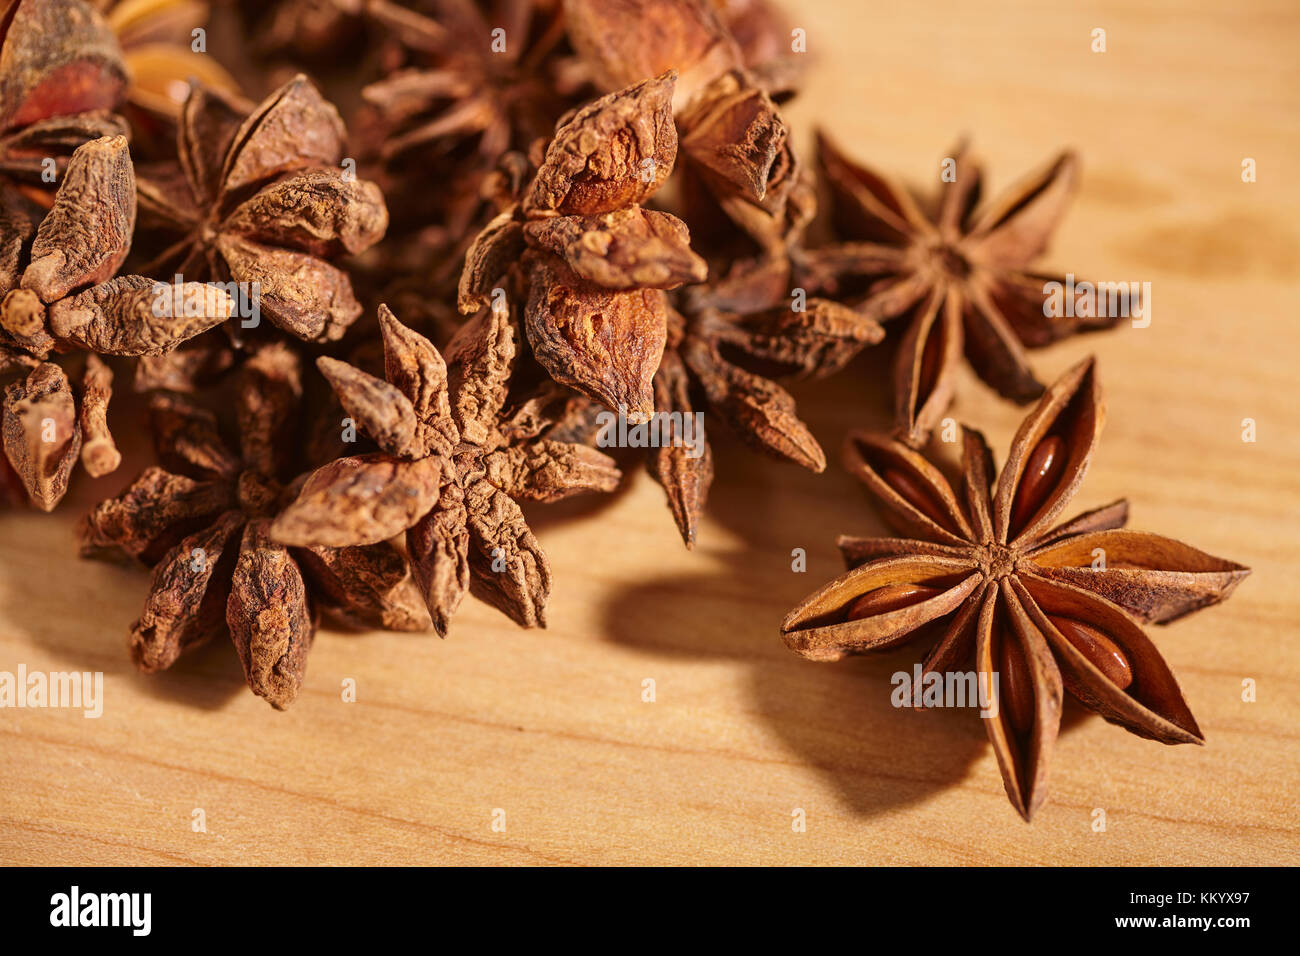 whole star anise, a typical spice in many South Asian cuisines and dishes Stock Photo